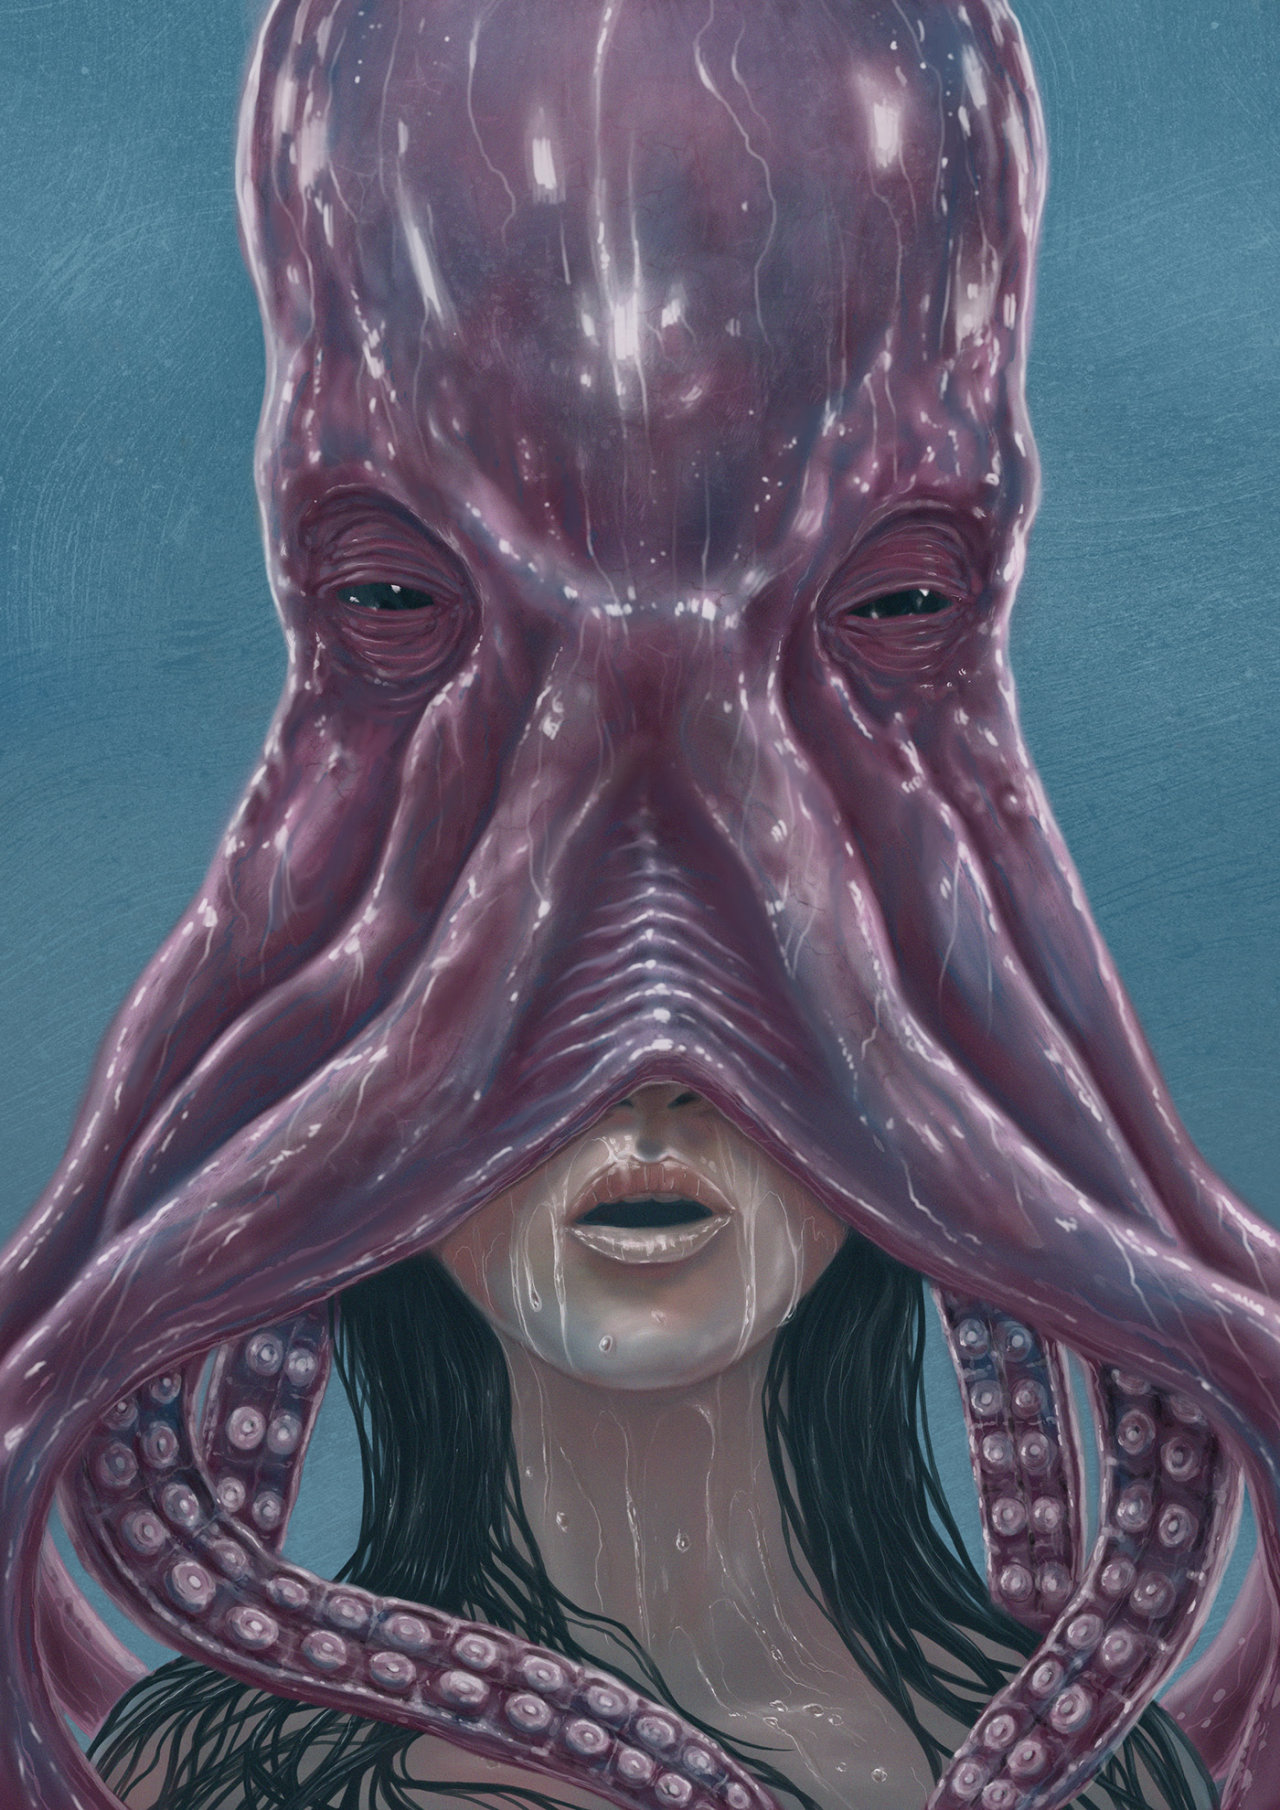 weirdletter:
“ Octopus, by Nick Charge, via Bēhance.
”